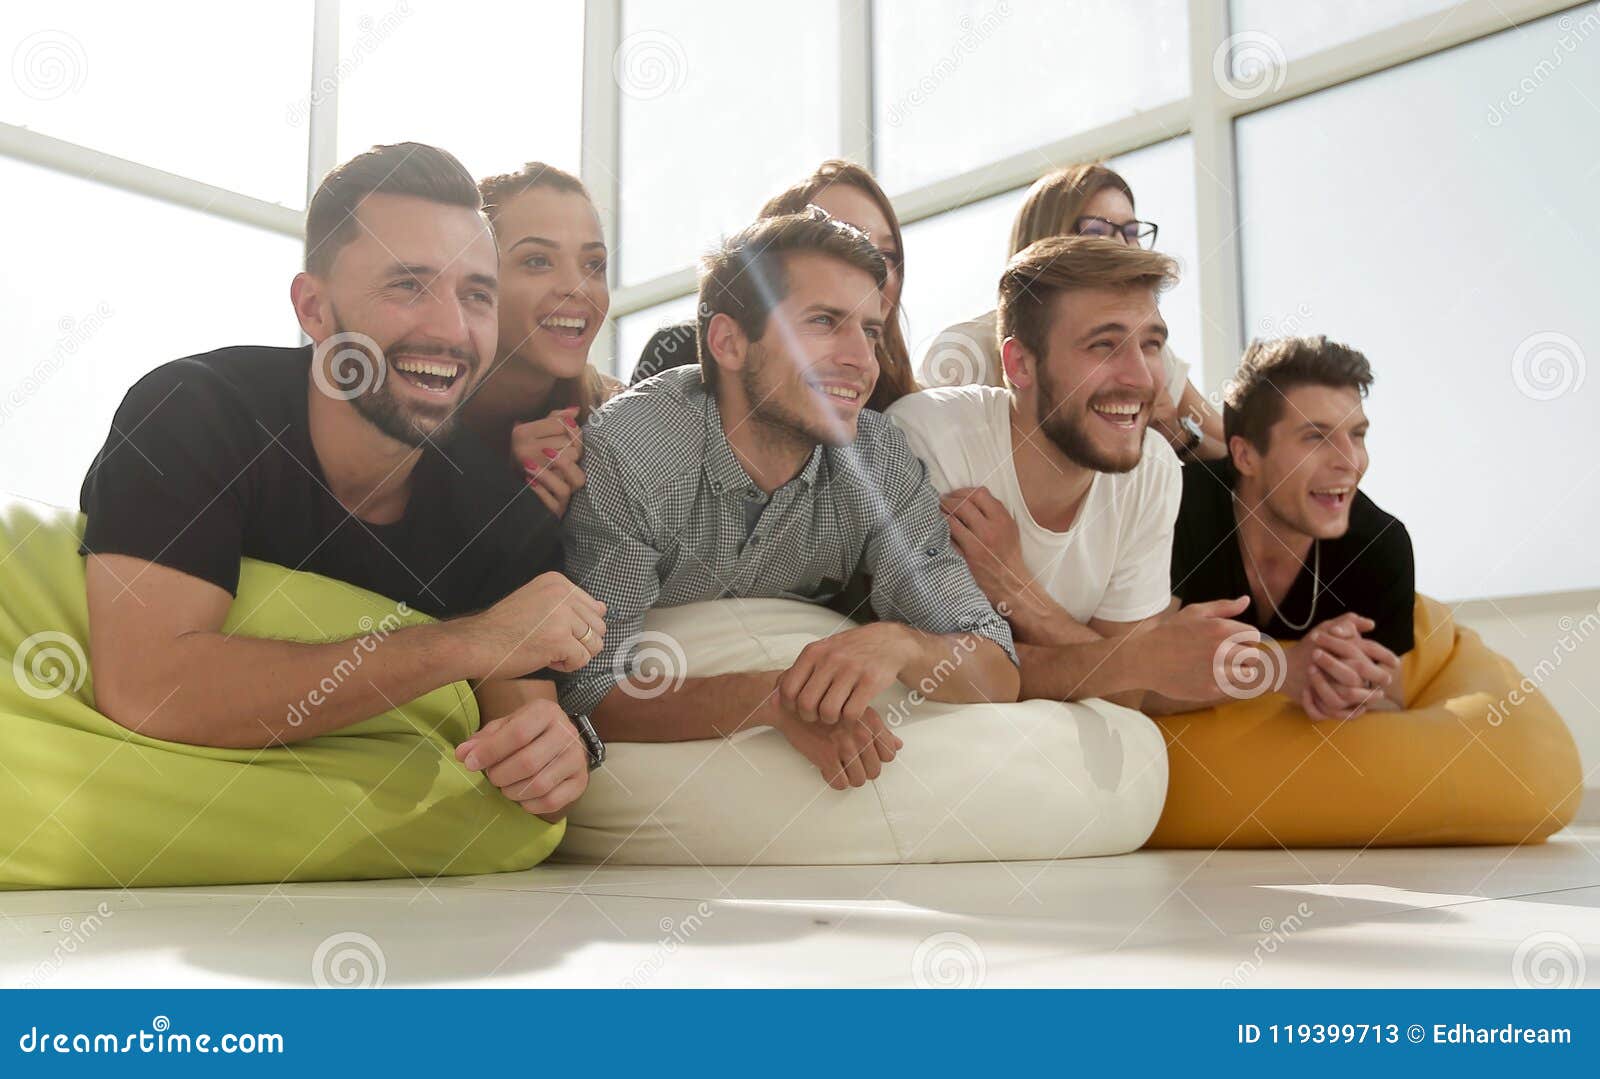 Group Of Young People Lying On The Floor And Smiling Stock Image